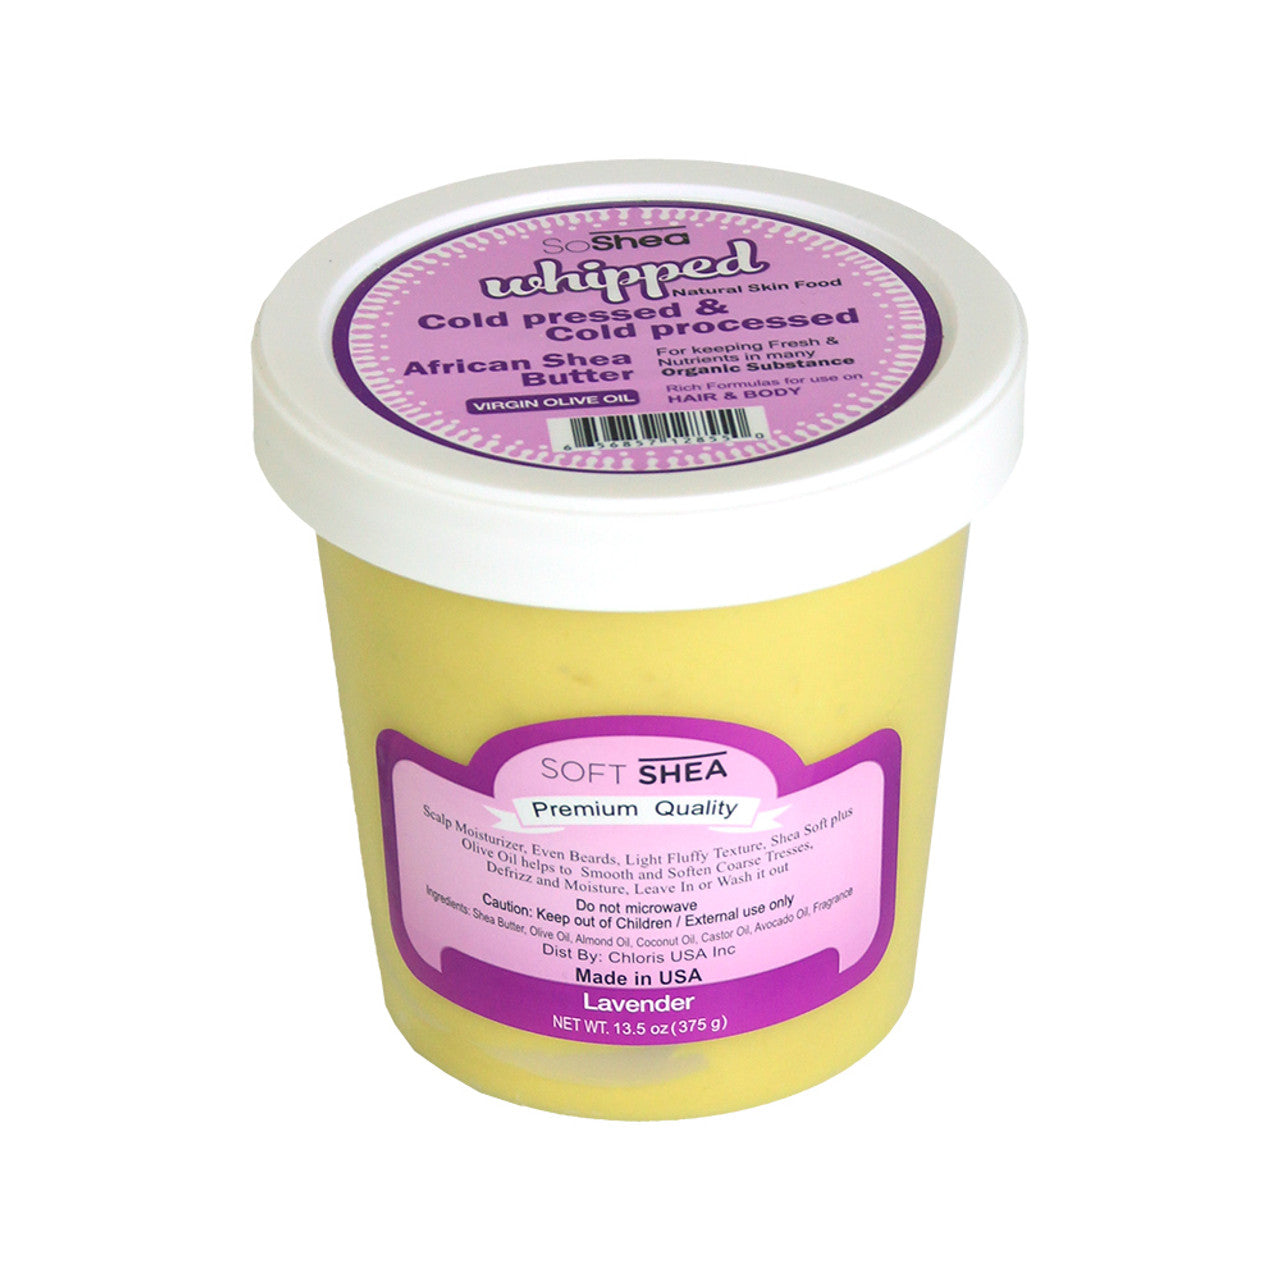 Whipped Shea Butter - Lavender